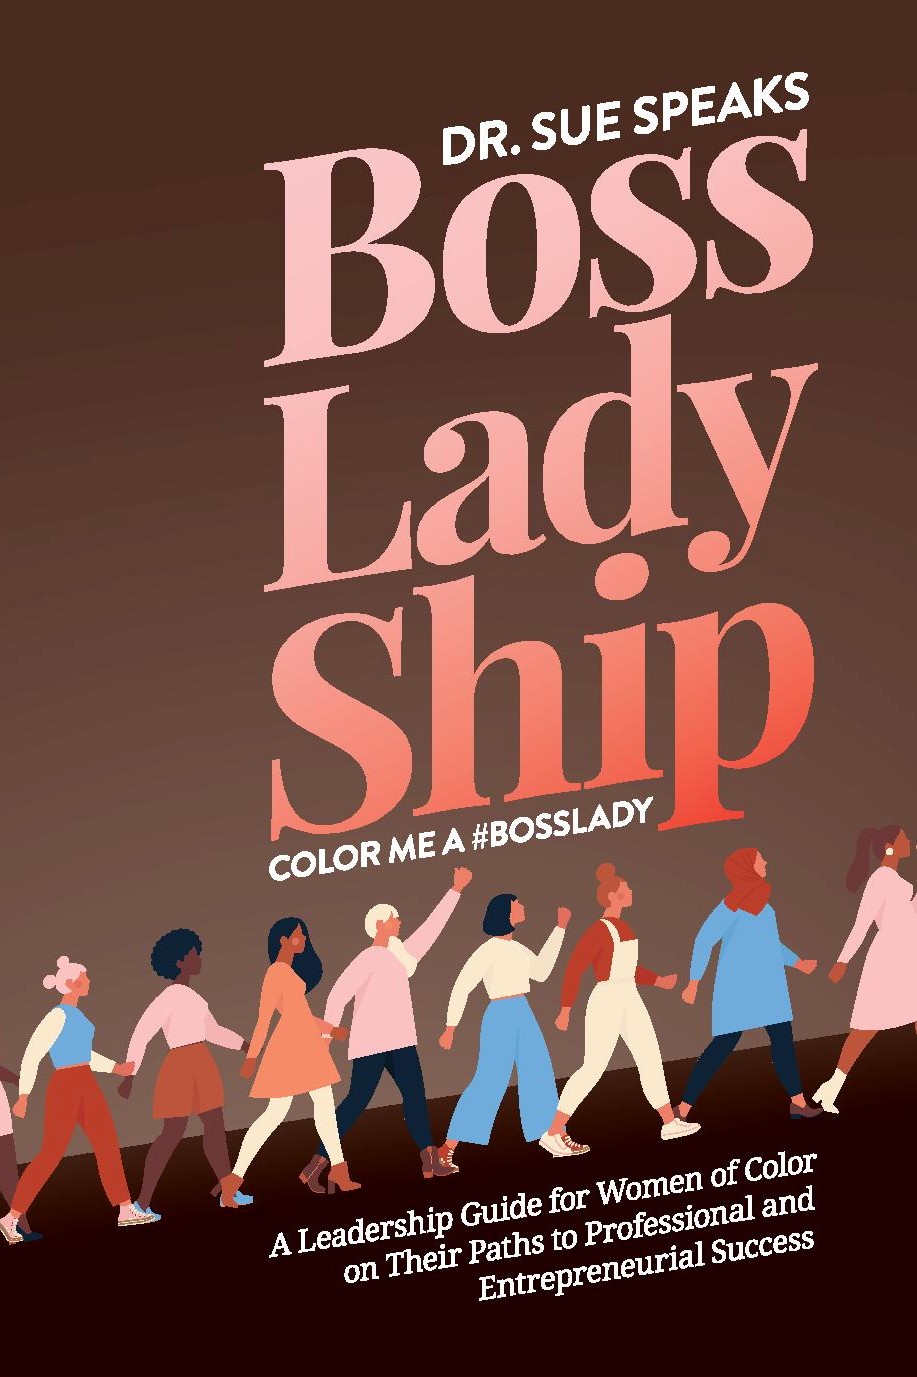 FREE: BossLadyShip: Color Me a #BossLady by Suzanne Morrison Williams